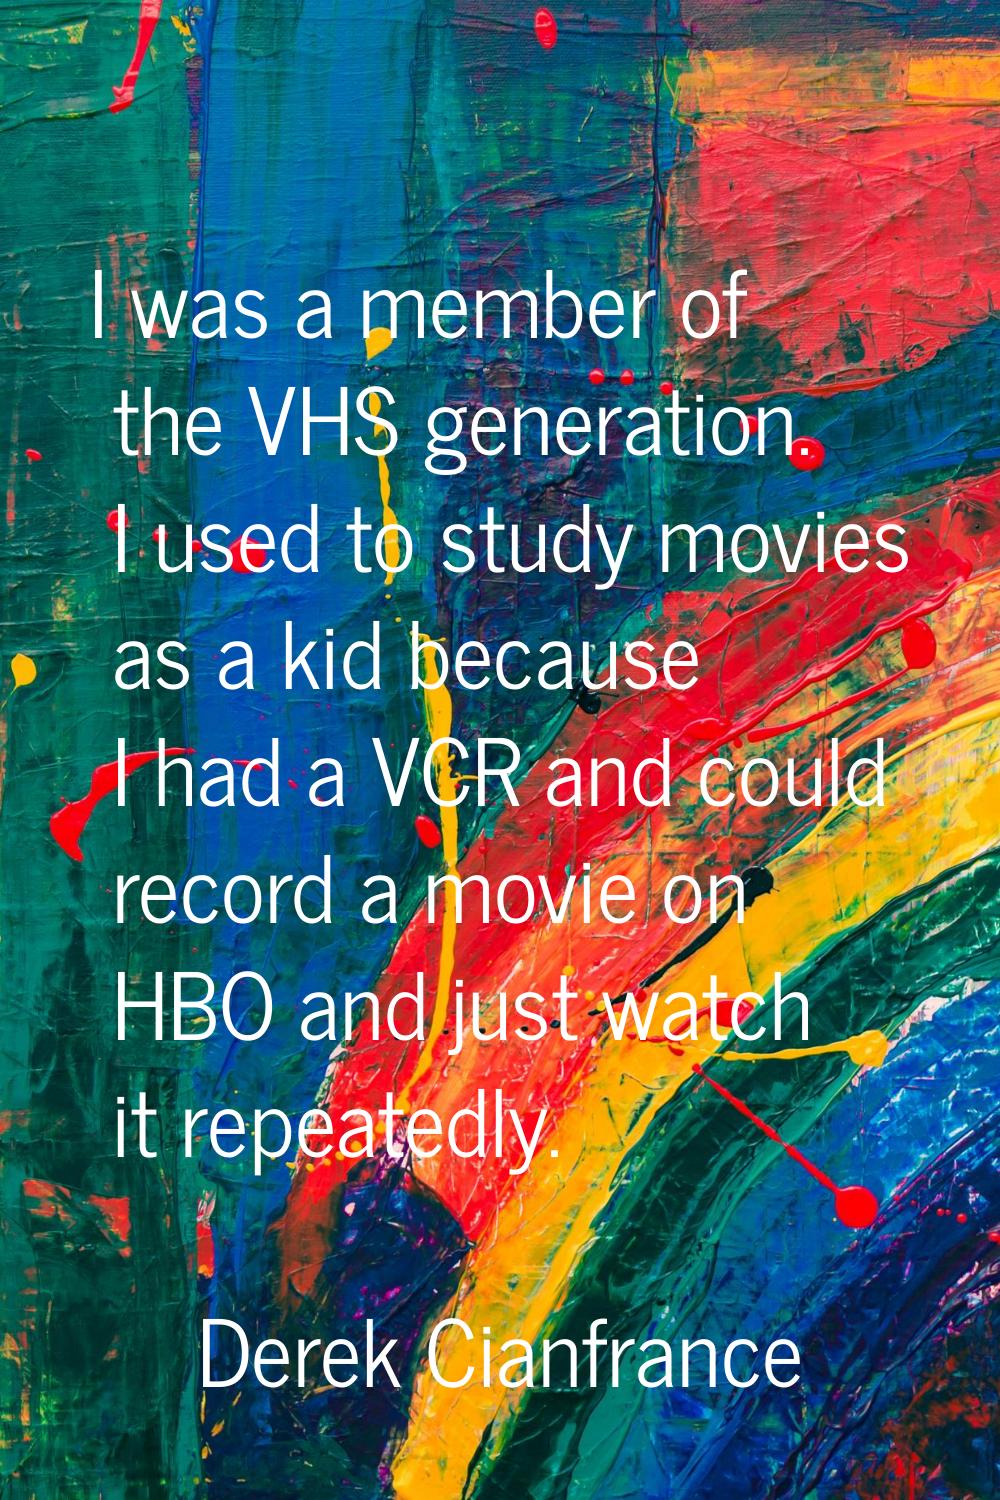 I was a member of the VHS generation. I used to study movies as a kid because I had a VCR and could